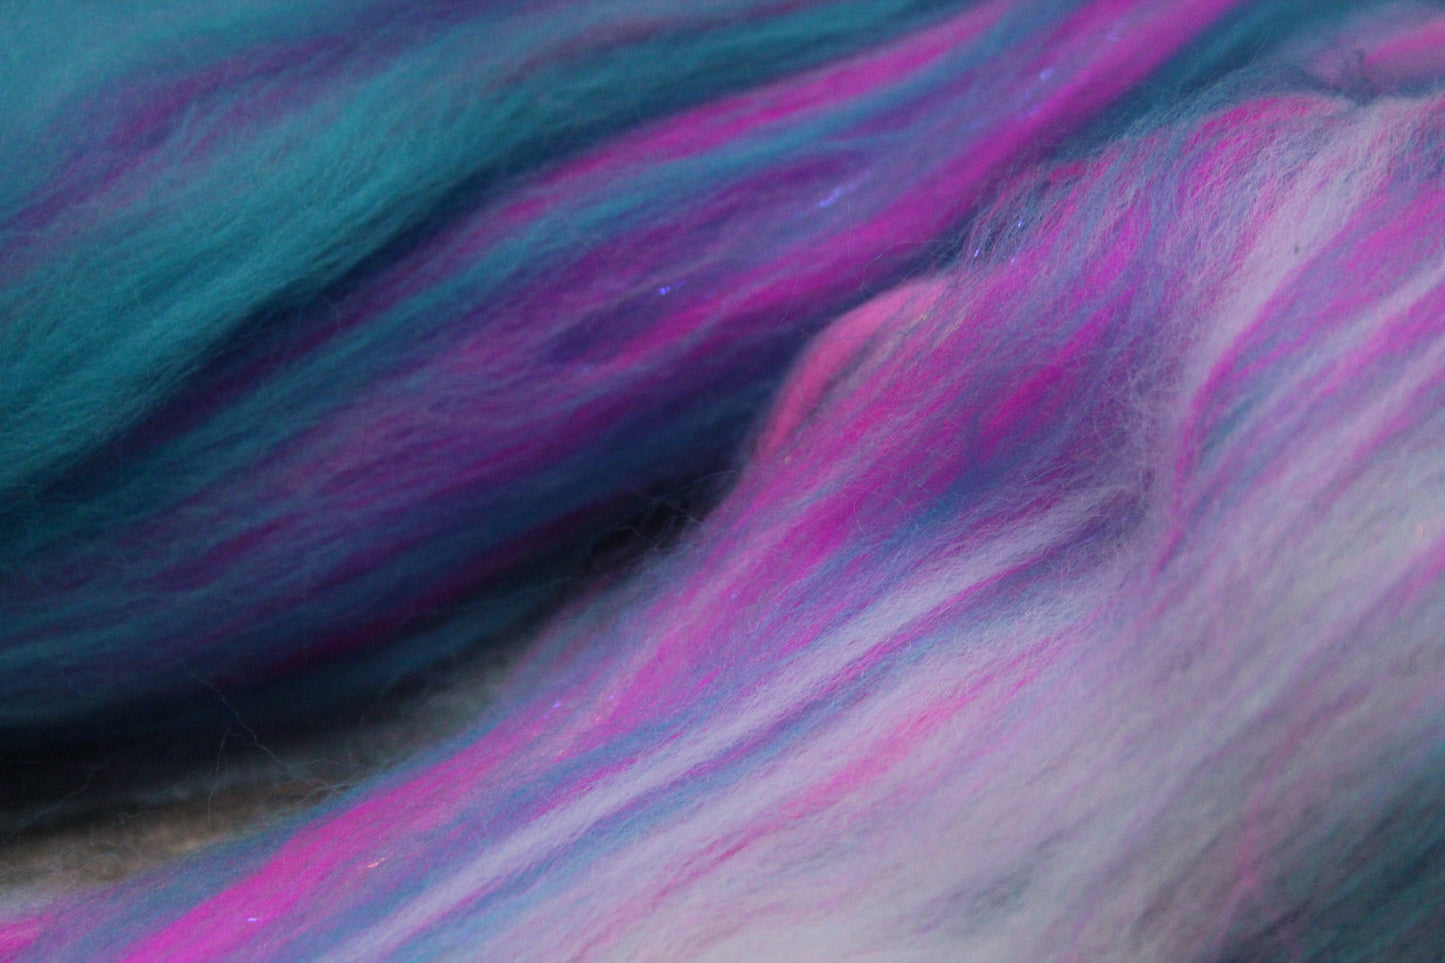 Wool Blend - Pink Turquoise- 56 grams / 1.9 oz  - Fibre for felting, weaving or spinning